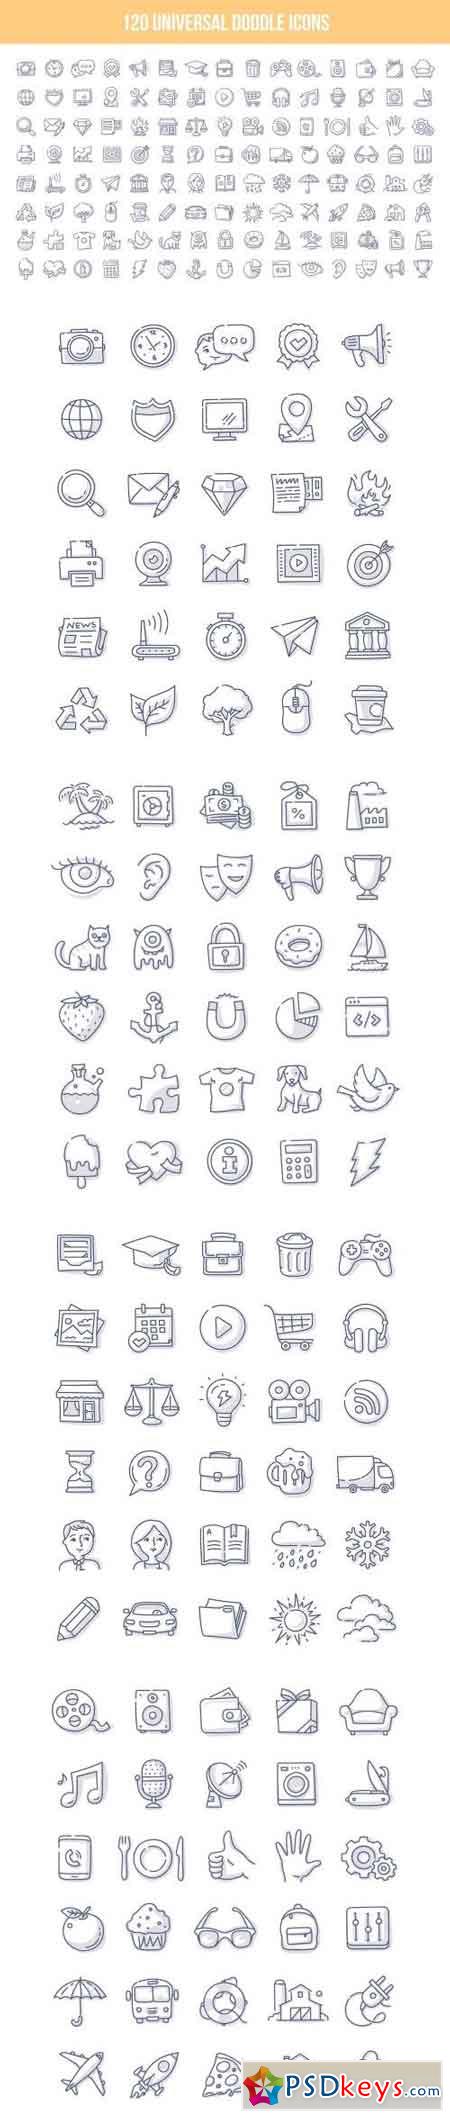 120 Universal Doodle Icons